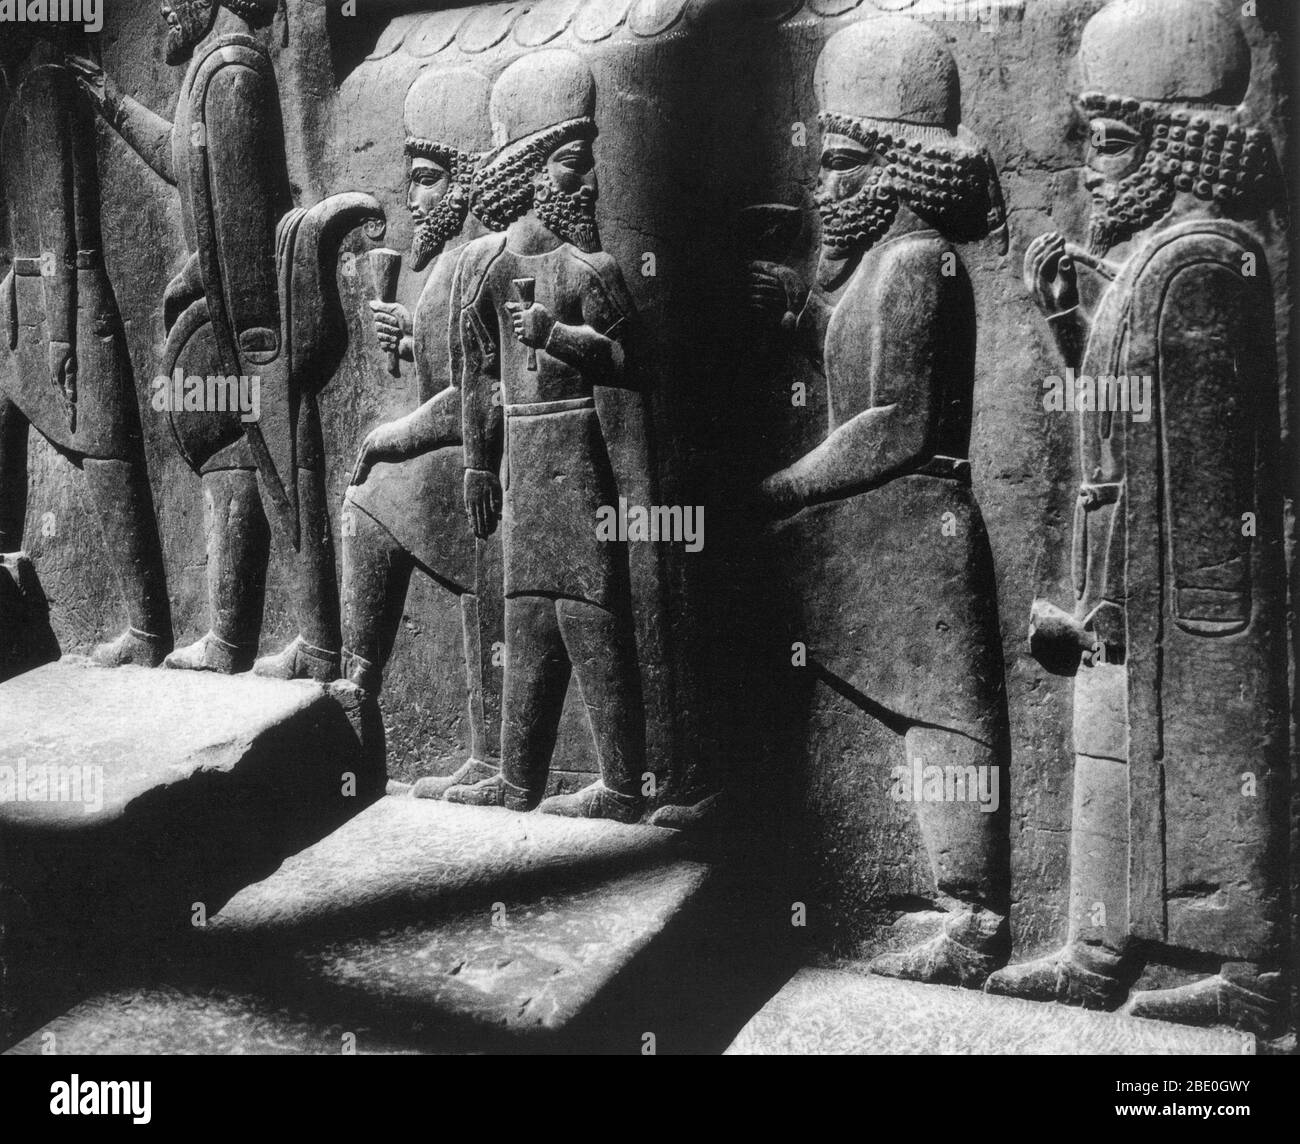 Tribute bearers in a relief along the northern staircase of the Council Hall (Tripylon), in the ancient Perisan capital of Persepolis, Iran, dating from about 500 BC. Stock Photo